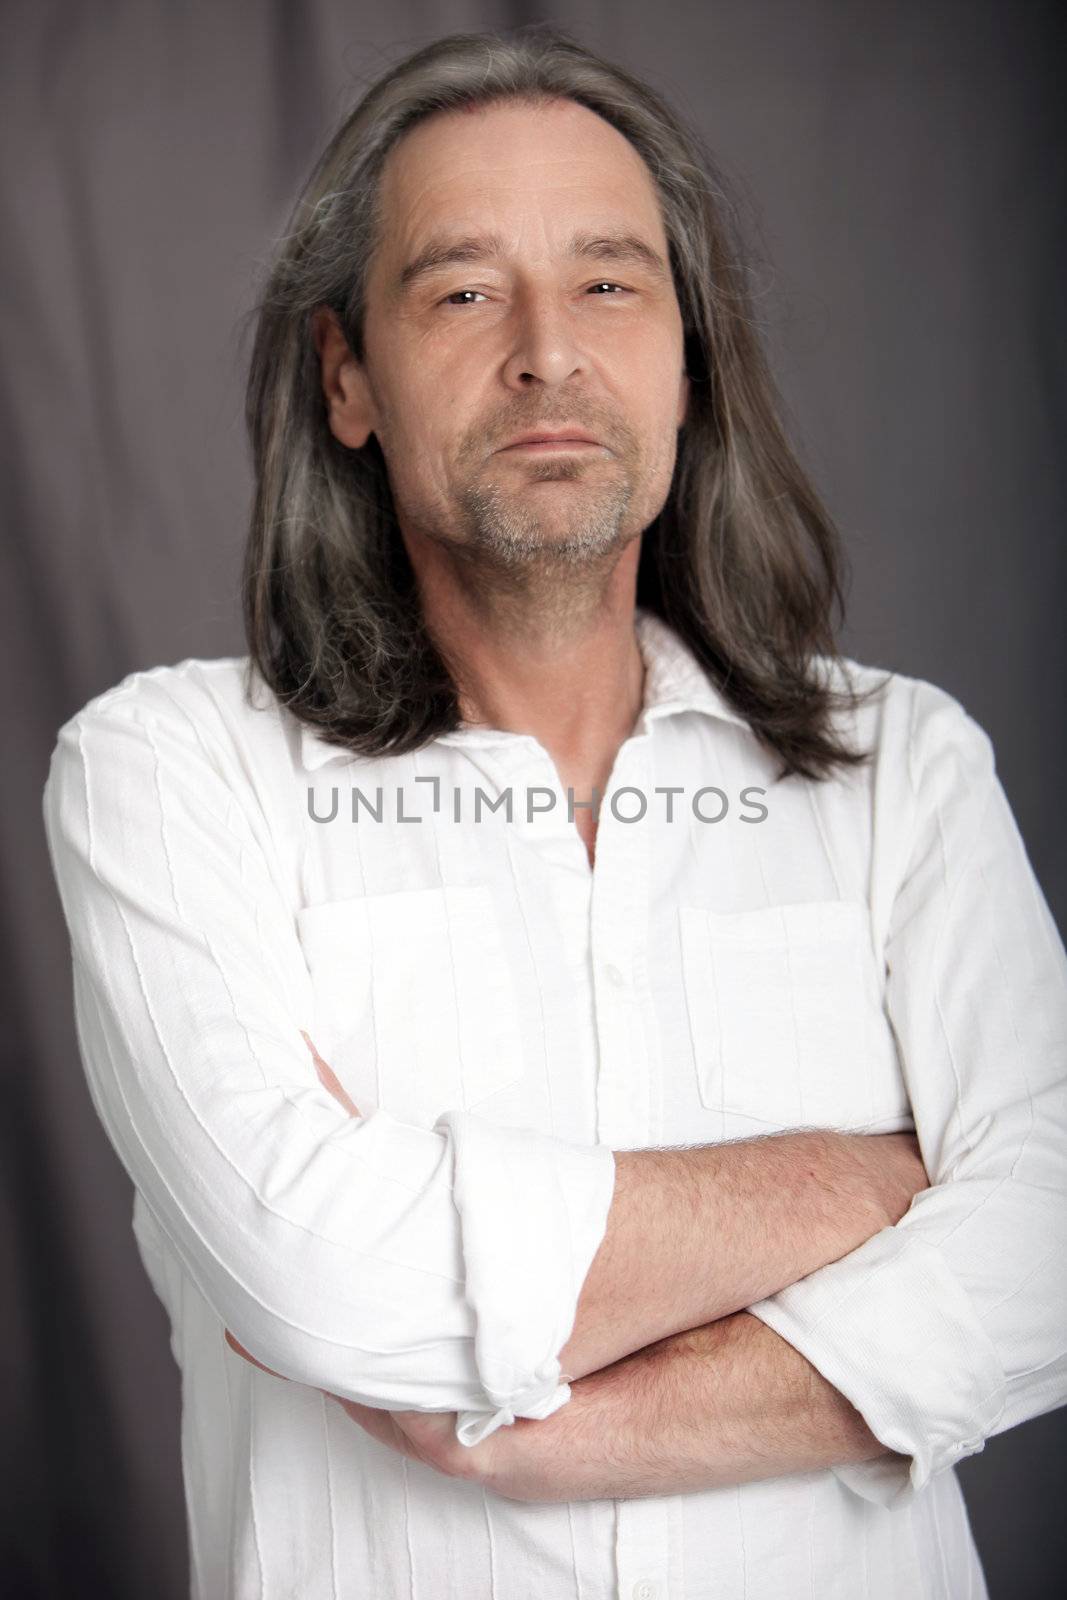 Sexy macho middle-aged man with shoulder length hair and a stubbly beard standing with his arms folded and an amused expression looking at the camera